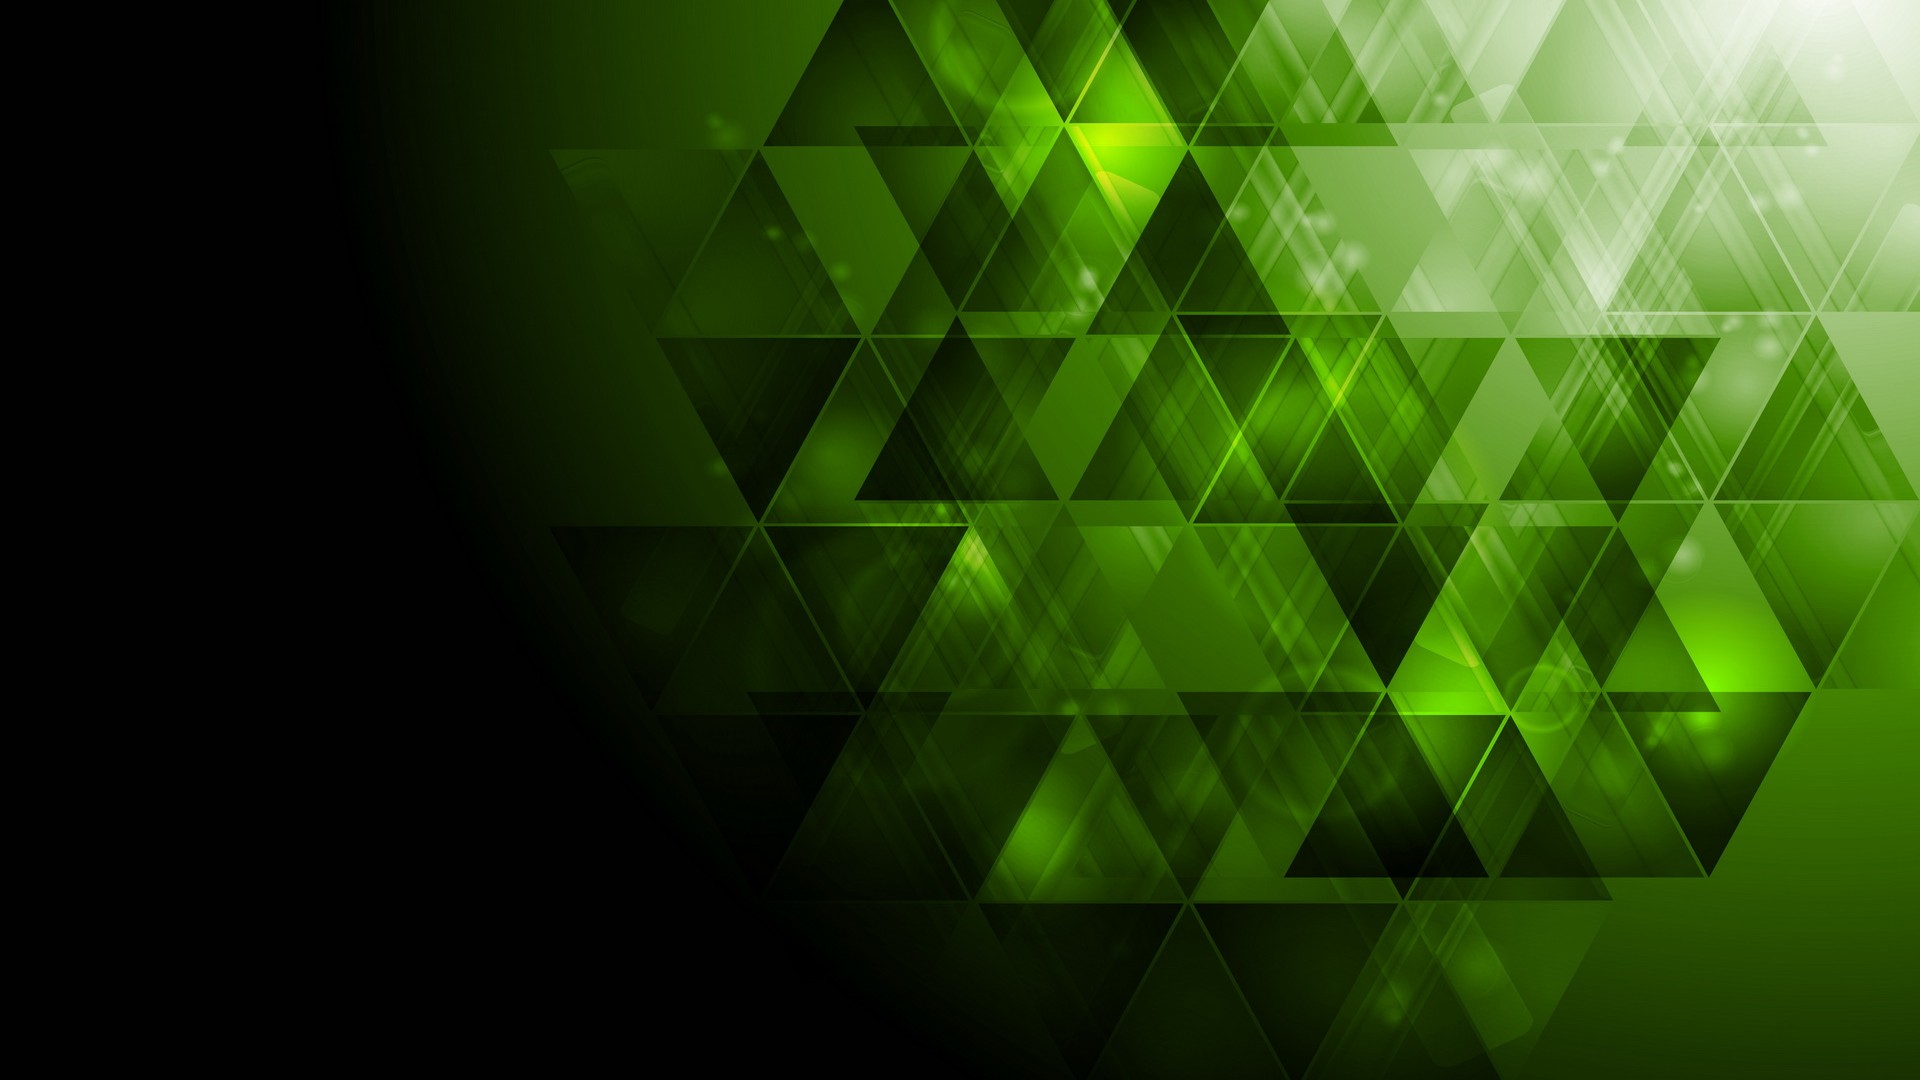 Black and Green Wallpaper For Desktop with image resolution 1920x1080 pixel. You can use this wallpaper as background for your desktop Computer Screensavers, Android or iPhone smartphones